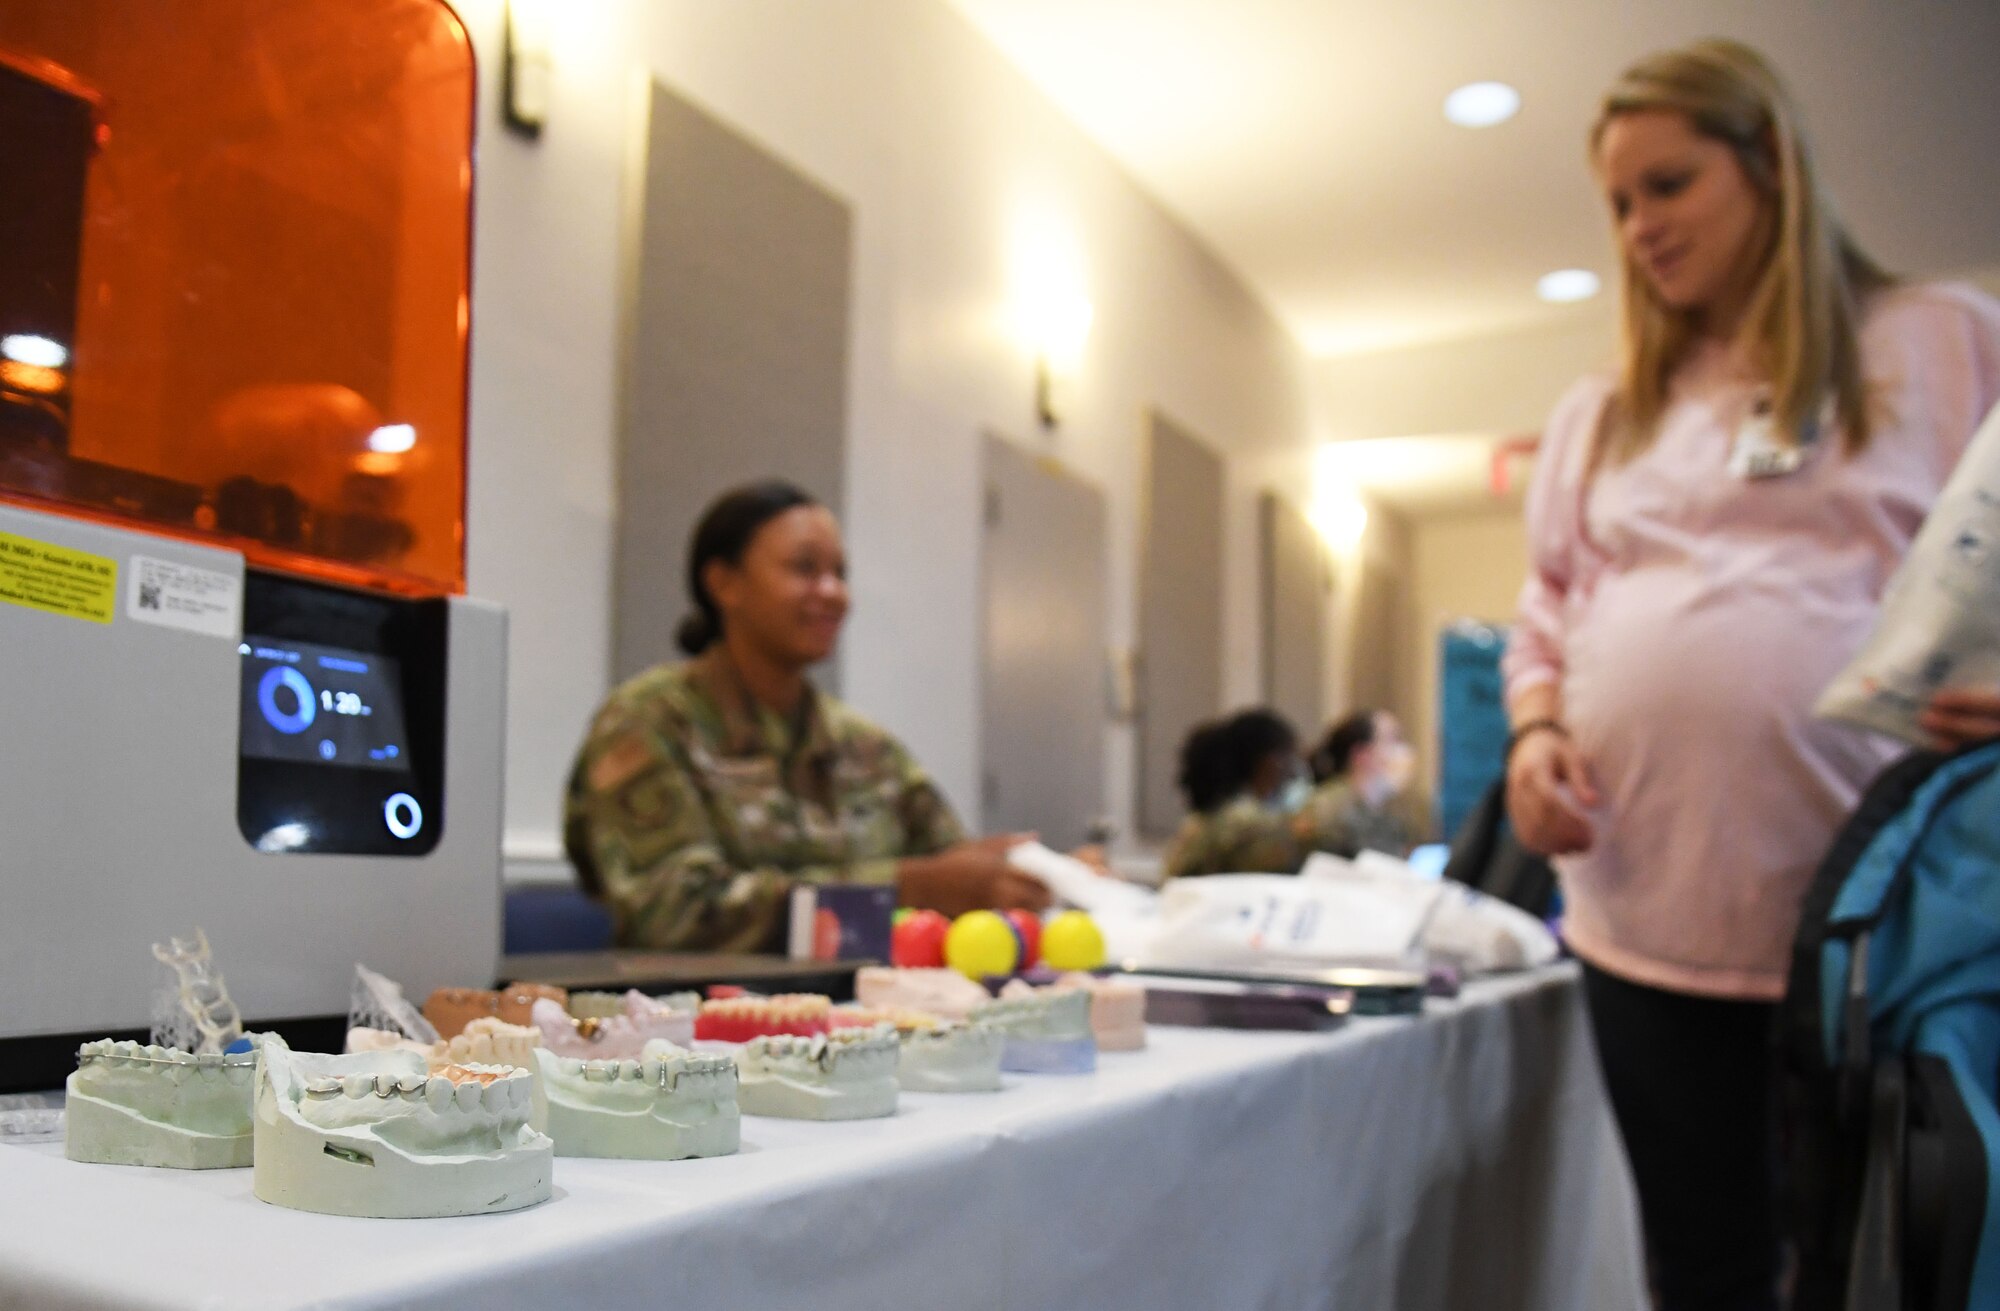 U.S. Air Force Staff Sgt. Lekevia Hayes, 81st Dental Squadron residency NCO in charge, provides dental care literature to Capt. Katie Armstrong, 81st Healthcare Operations Squadron ER clinical nurse, during the 11th Annual 81st Medical Group Health Expo inside the Keesler Medical Center auditorium at Keesler Air Force Base, Mississippi, October 7, 2022. The 81st MDG hosted the walk-in event, which included information booths and scheduling appointments for multiple types of cancer and chronic diseases in honor of Breast Cancer Awareness Month. (U.S. Air Force photo by Kemberly Groue)